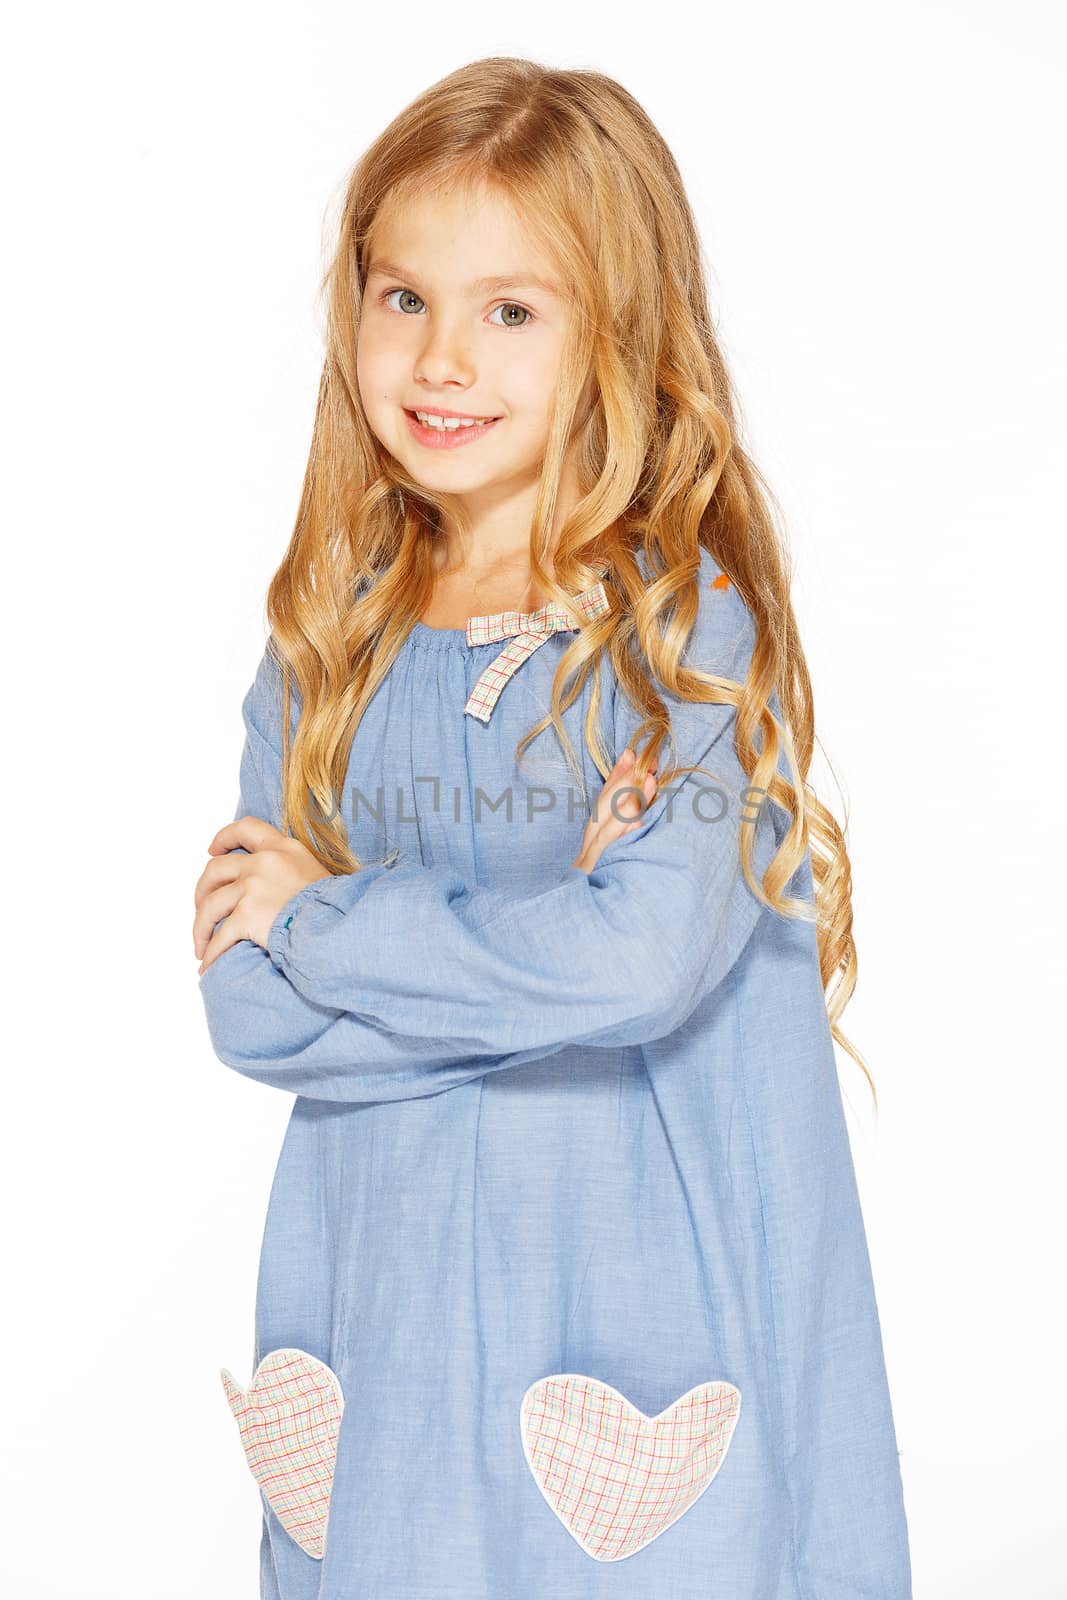 Little girl posing for the camera in blue dress with blond curls